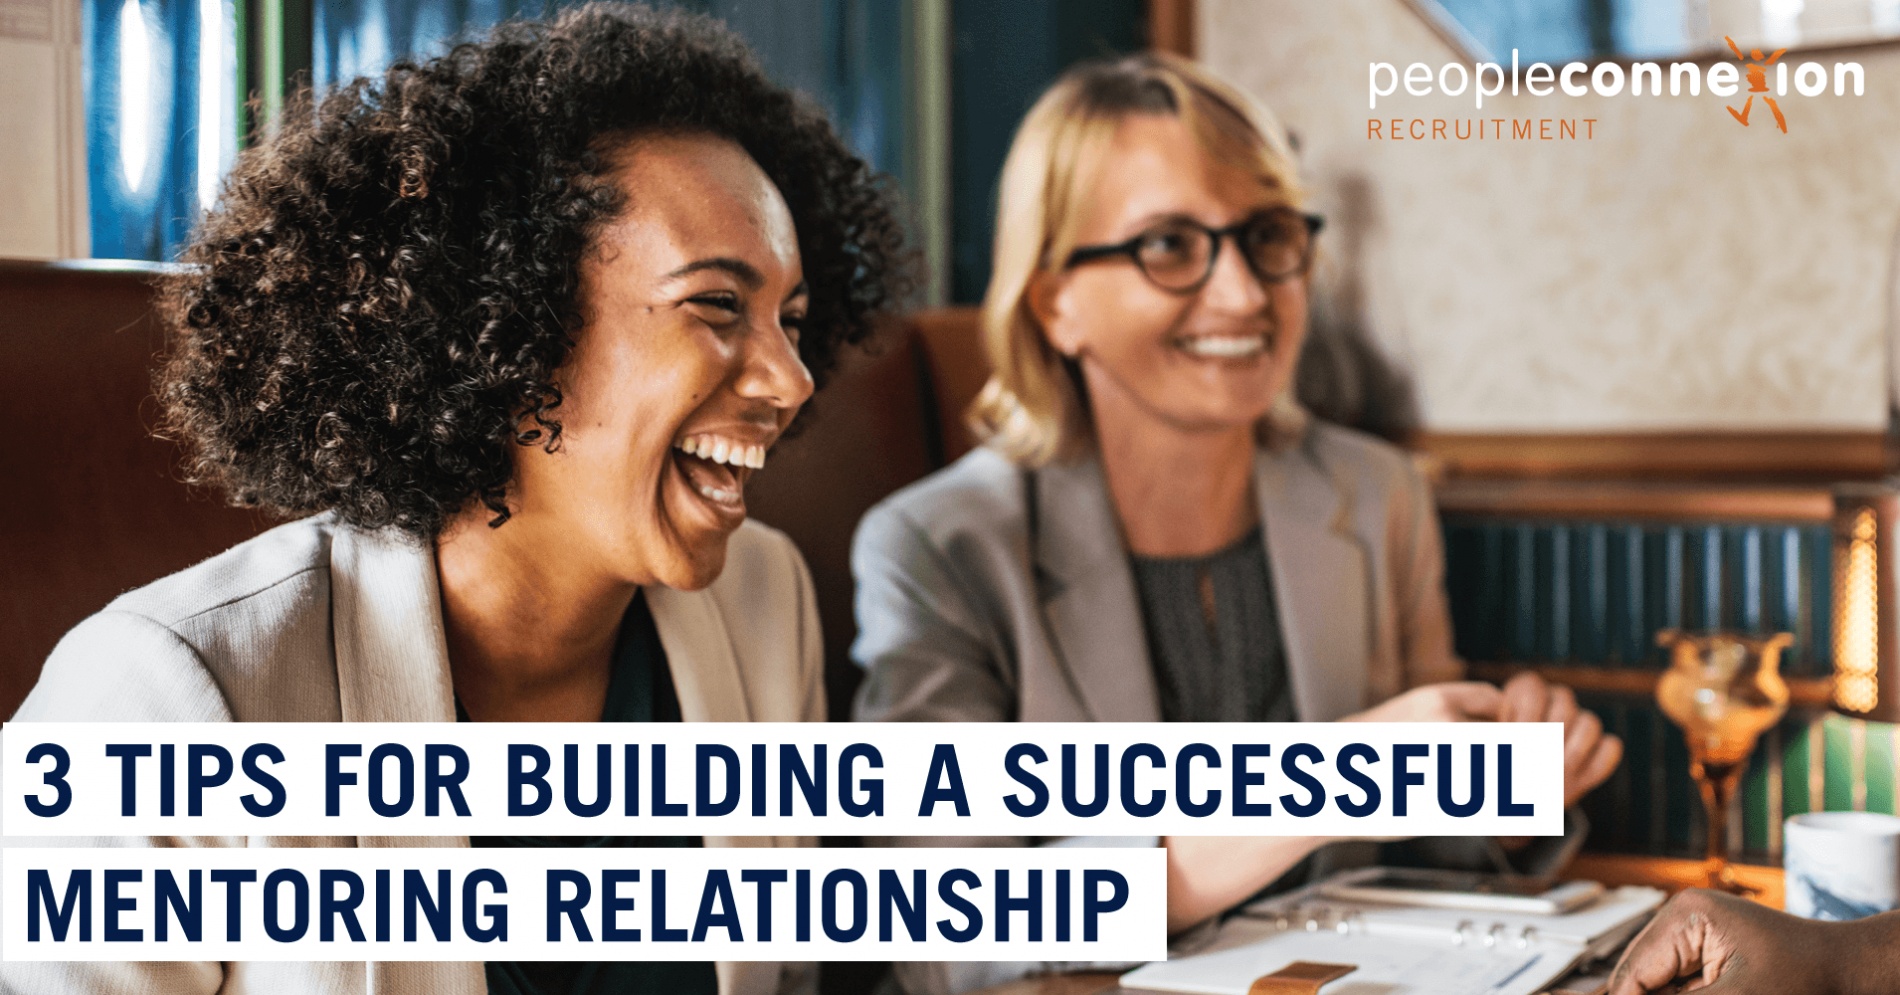 3-Tips-for-Building-a-Successful-Mentoring-Relationship (1)